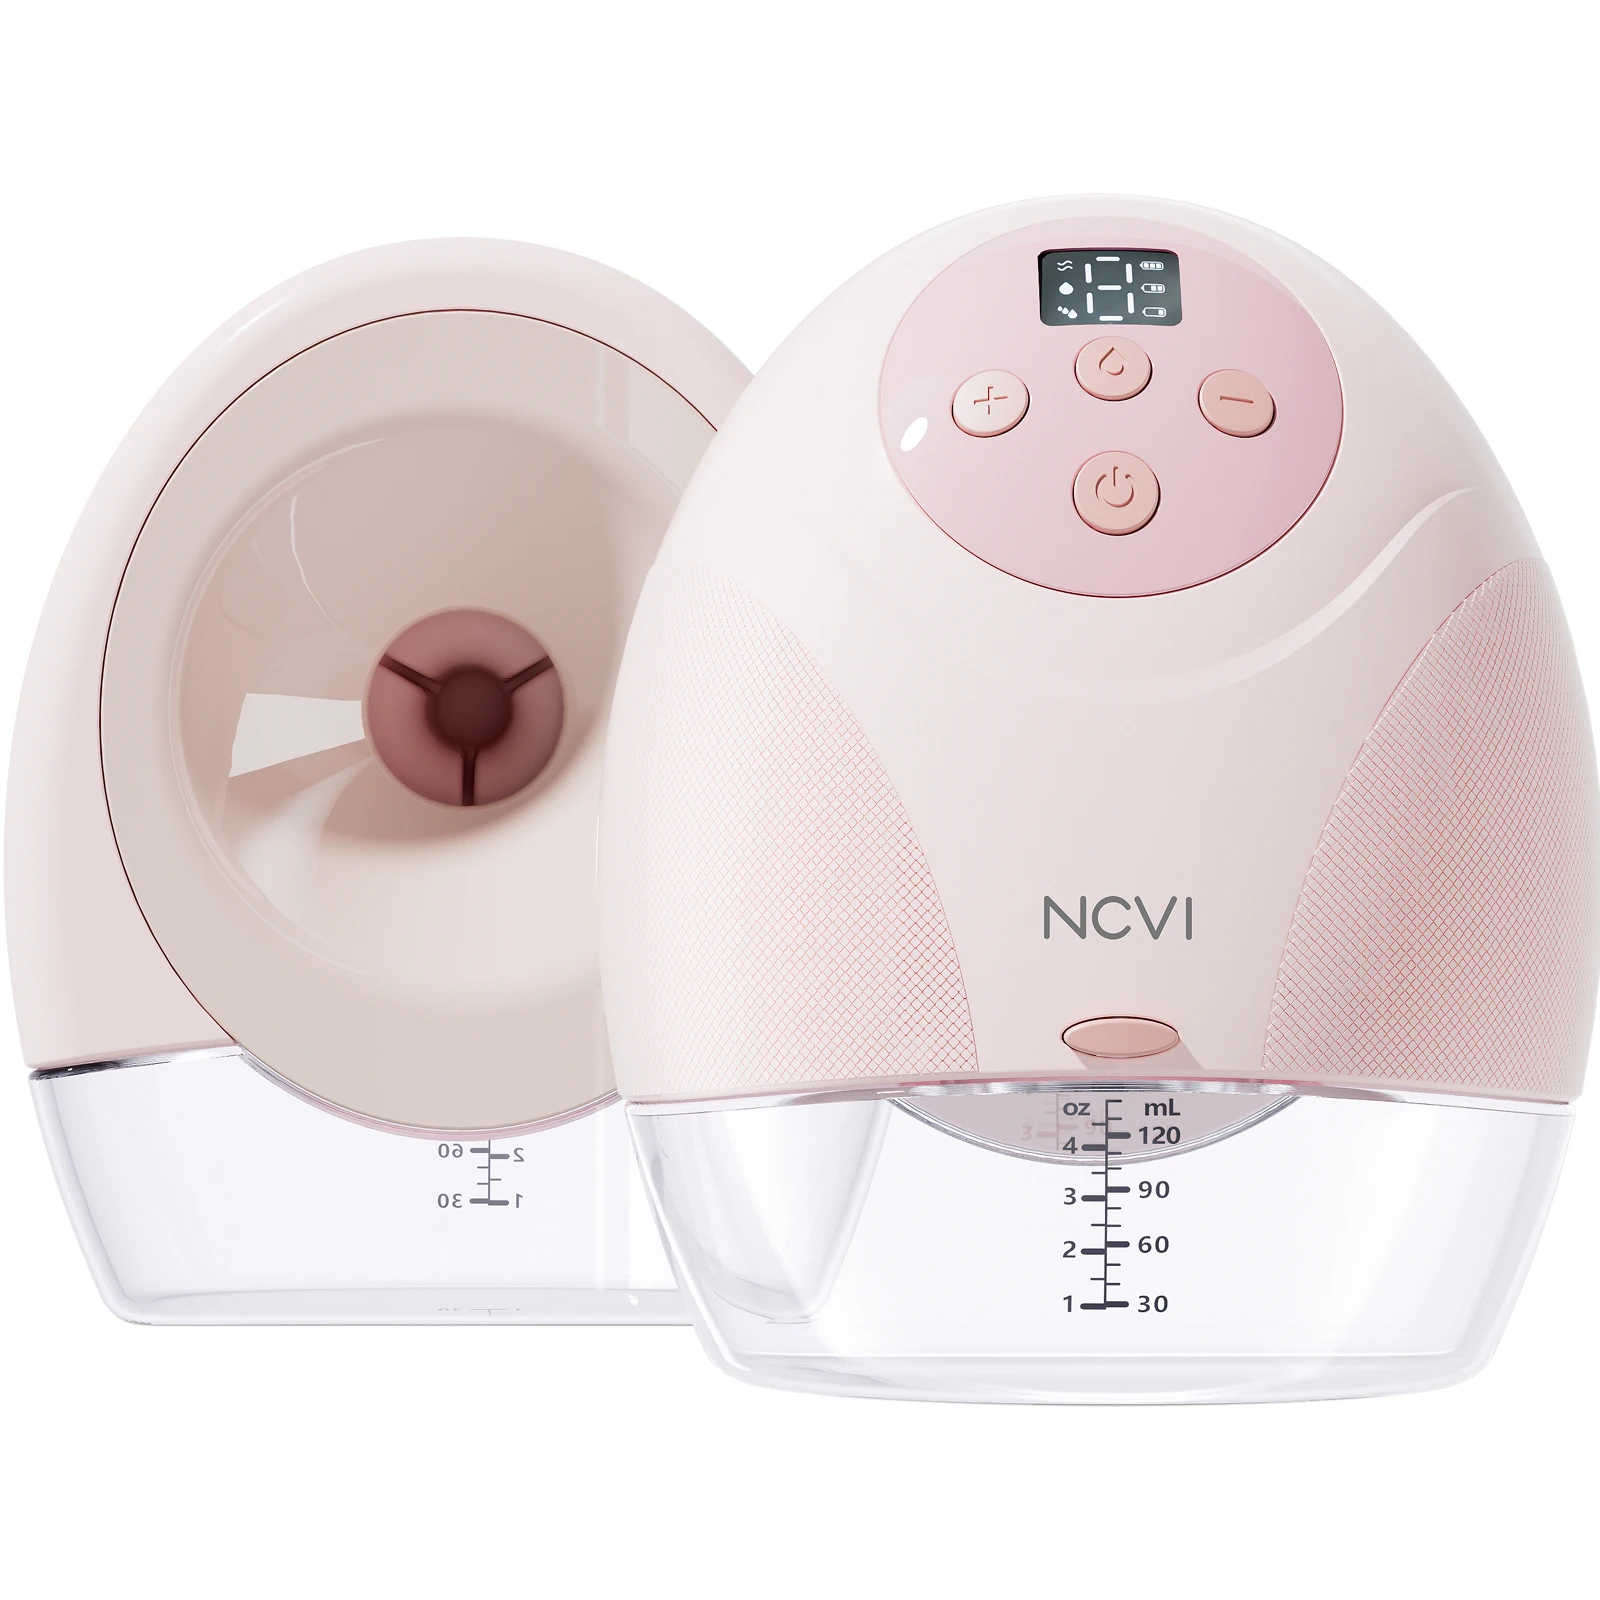 NCVI Wearable Breast Pump, Hands Free Breast Pump, 3 Modes & 9 Levels, Painless Ultra Quiet Rechargeable Battery, 21/24mm Flange